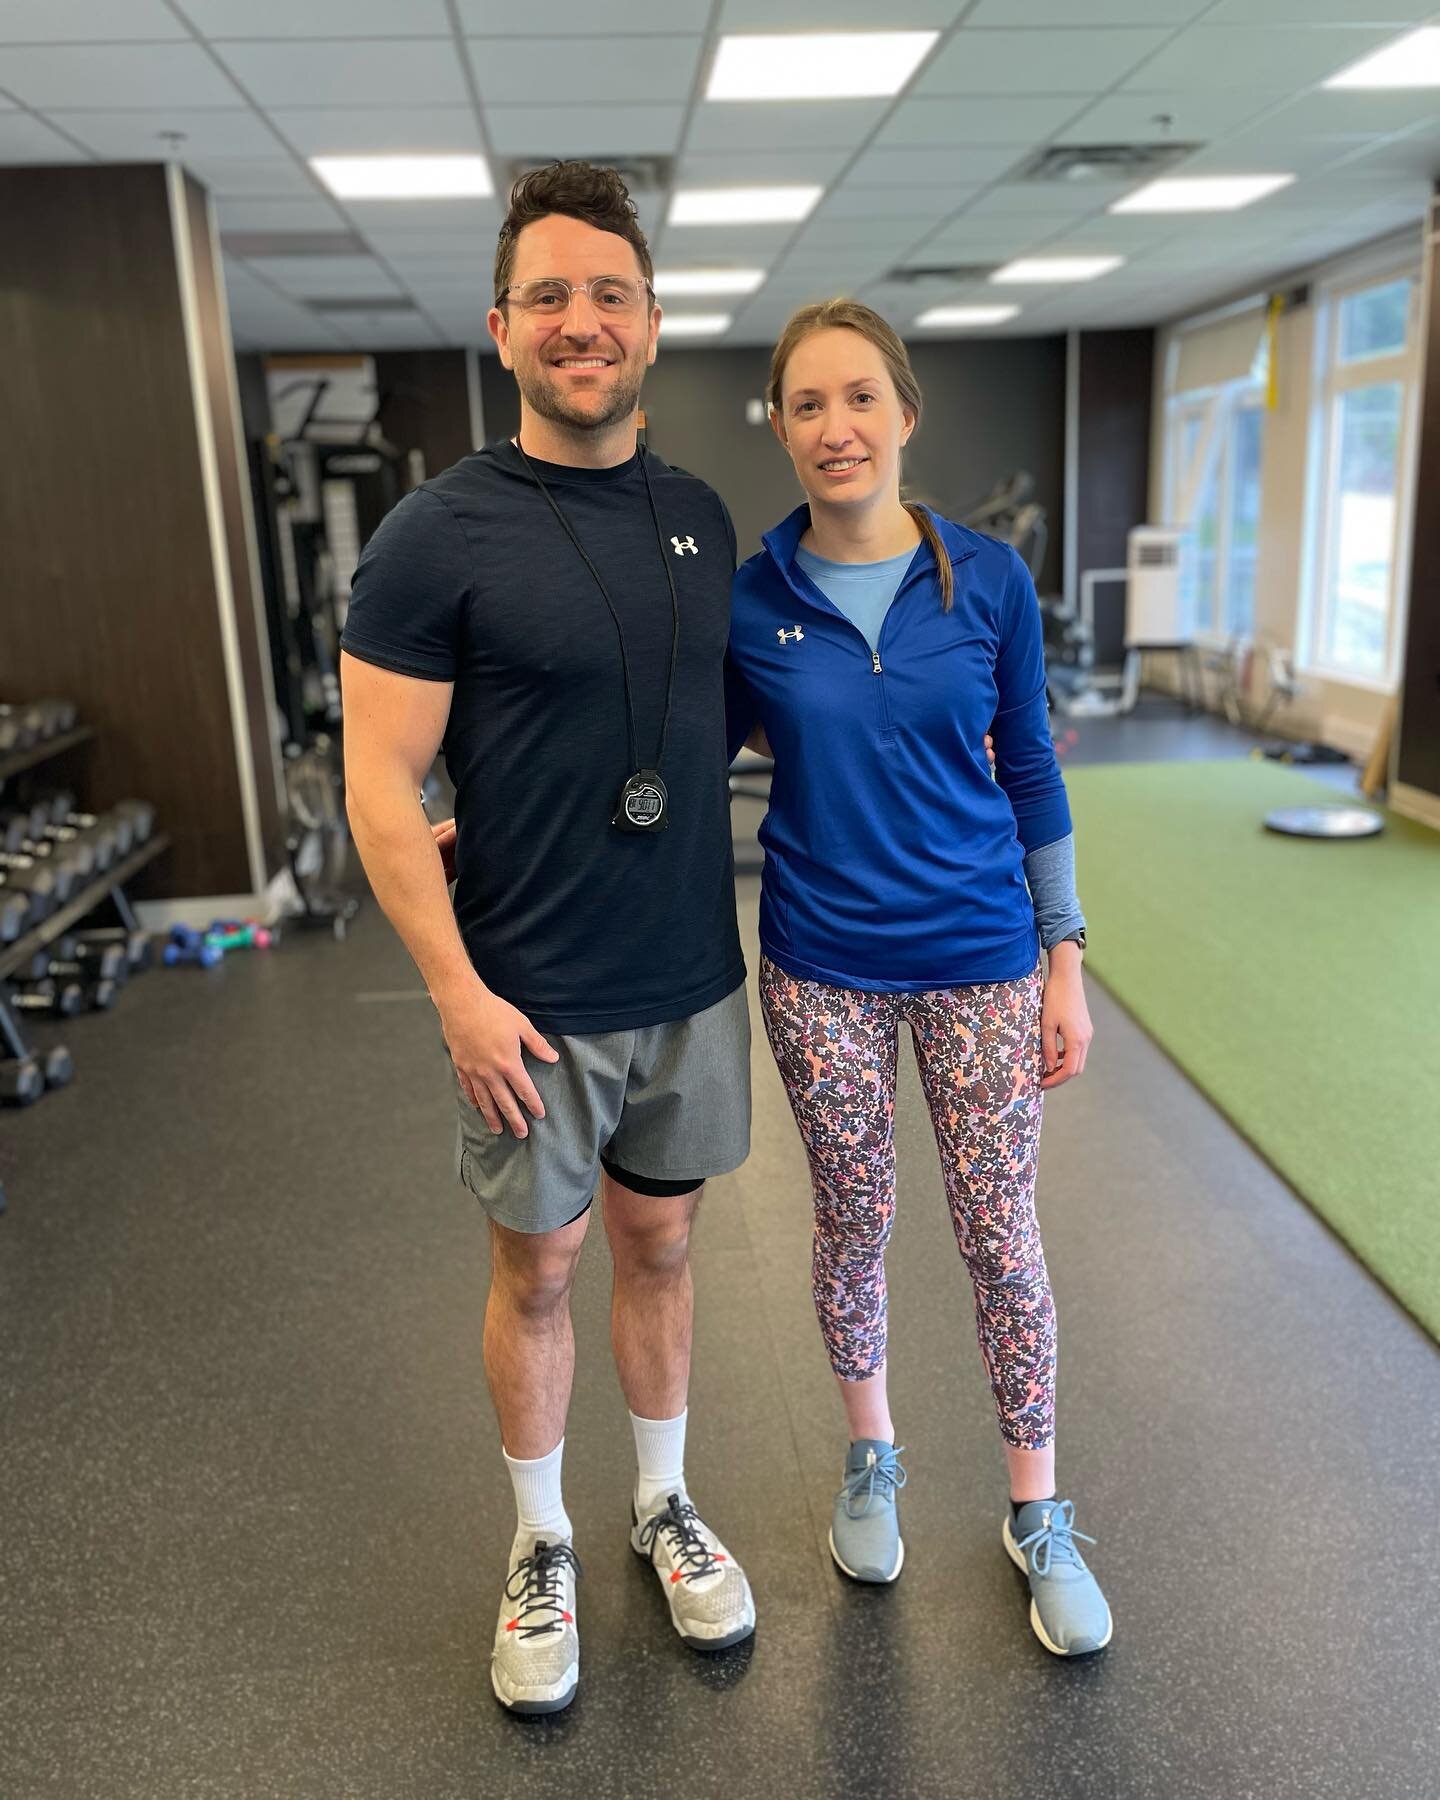 One of our amazing patients, making incredible progress! Helping you reach your goals and hearing the impact Team Strada has made on your life means everything to us! 

&ldquo;When I started training with Greg two years ago I was in pain on a daily b